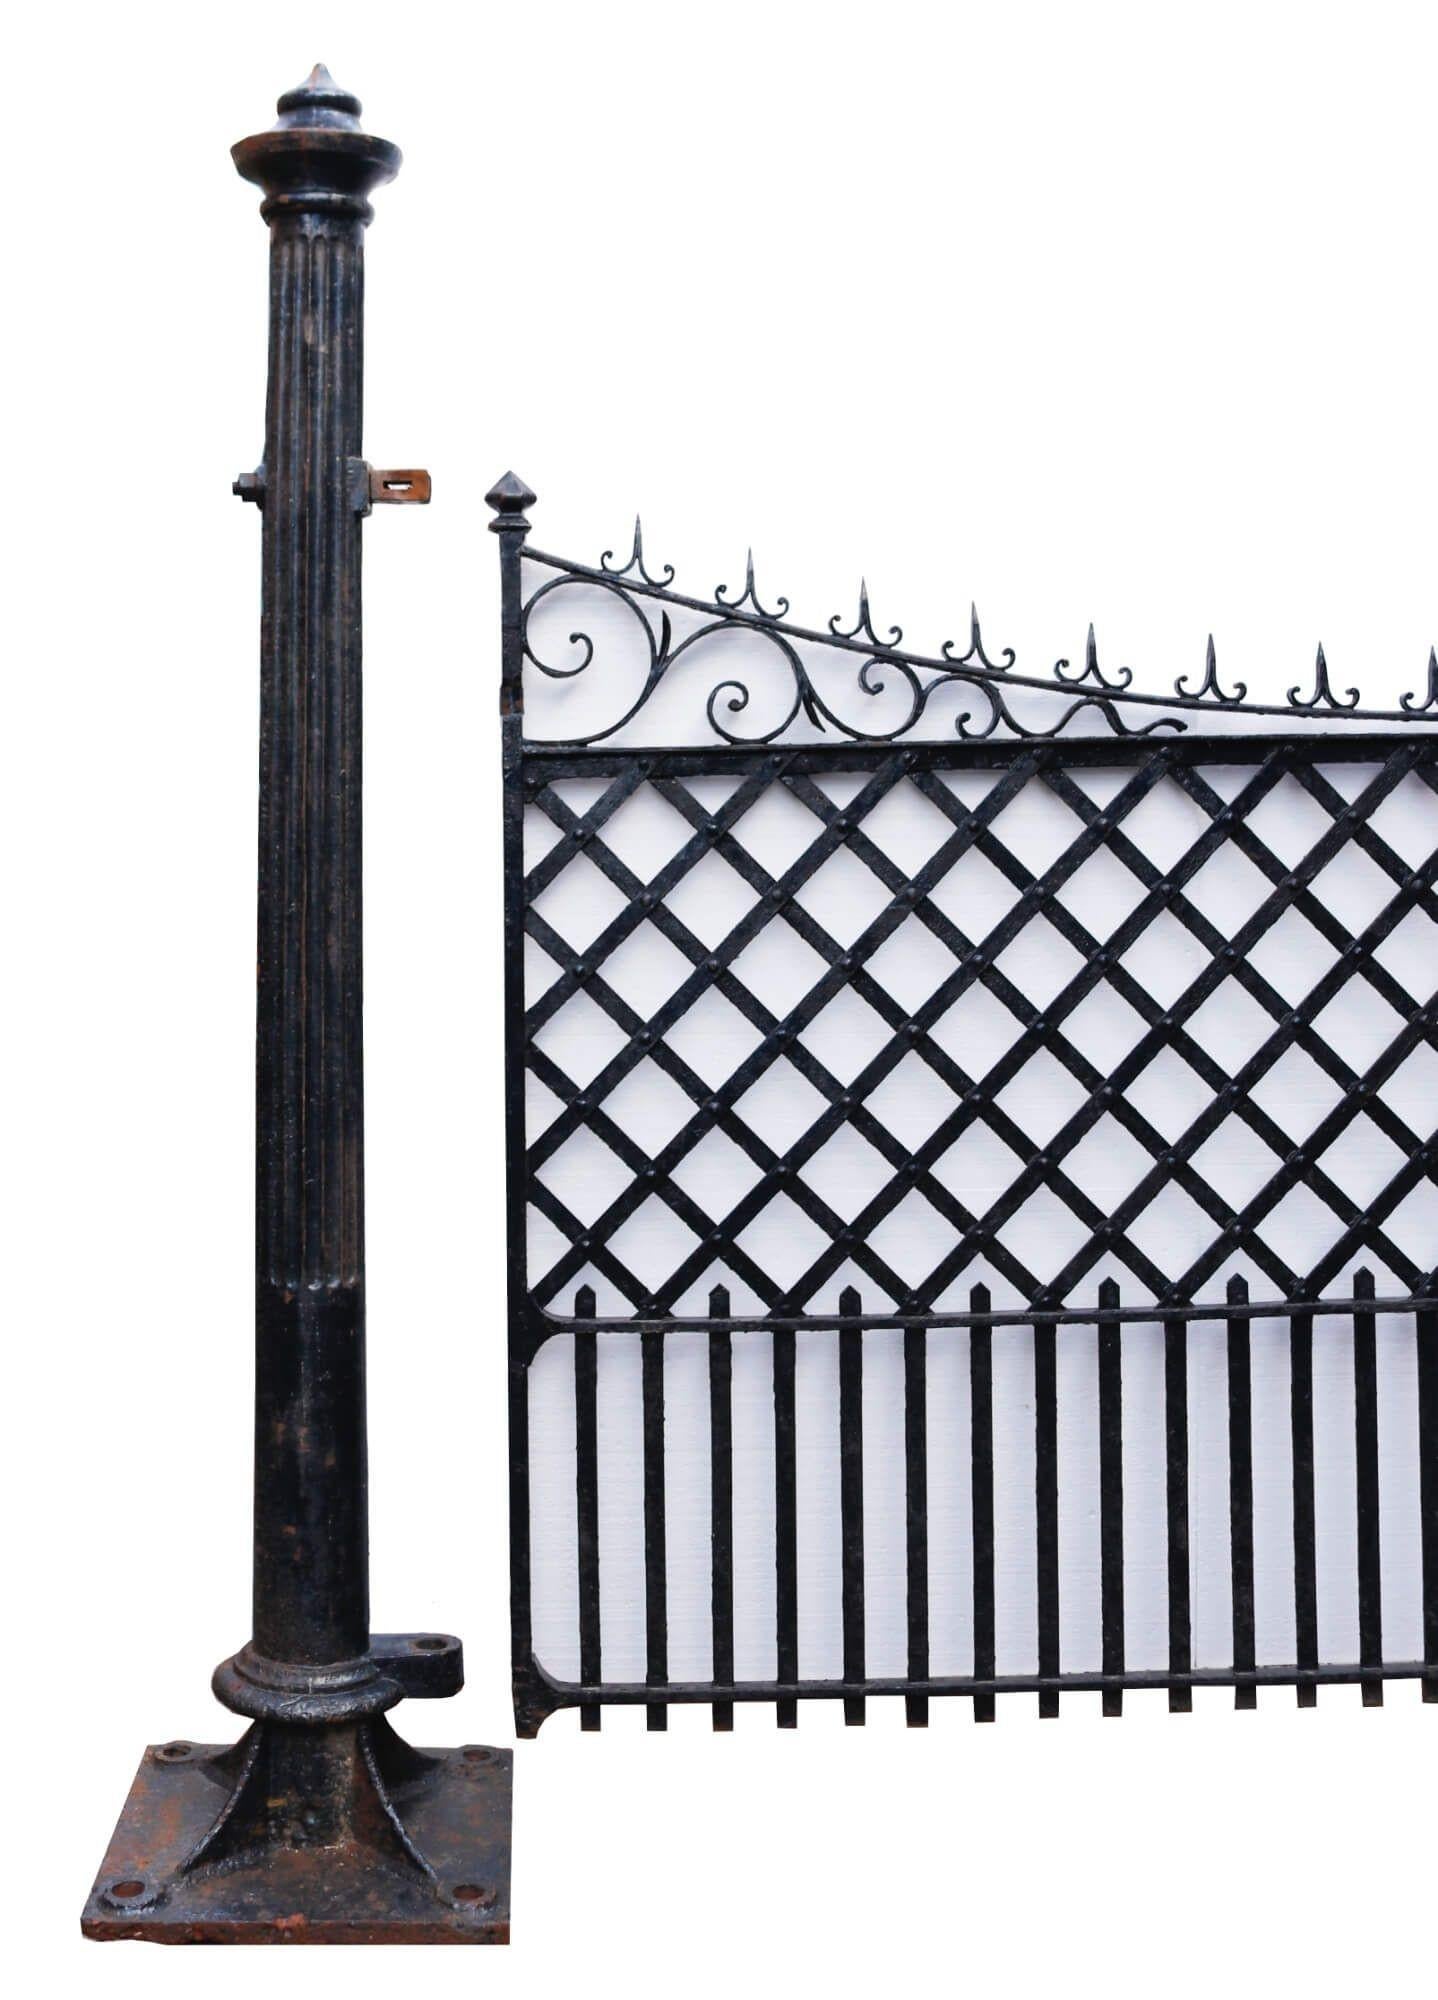 An elegant set of reclaimed wrought iron gates with accompanying cast iron posts to set the stage for a beautiful driveway in a country home or townhouse. Delicately made from wrought iron, each gate features a sweeping top with ornate scrolling